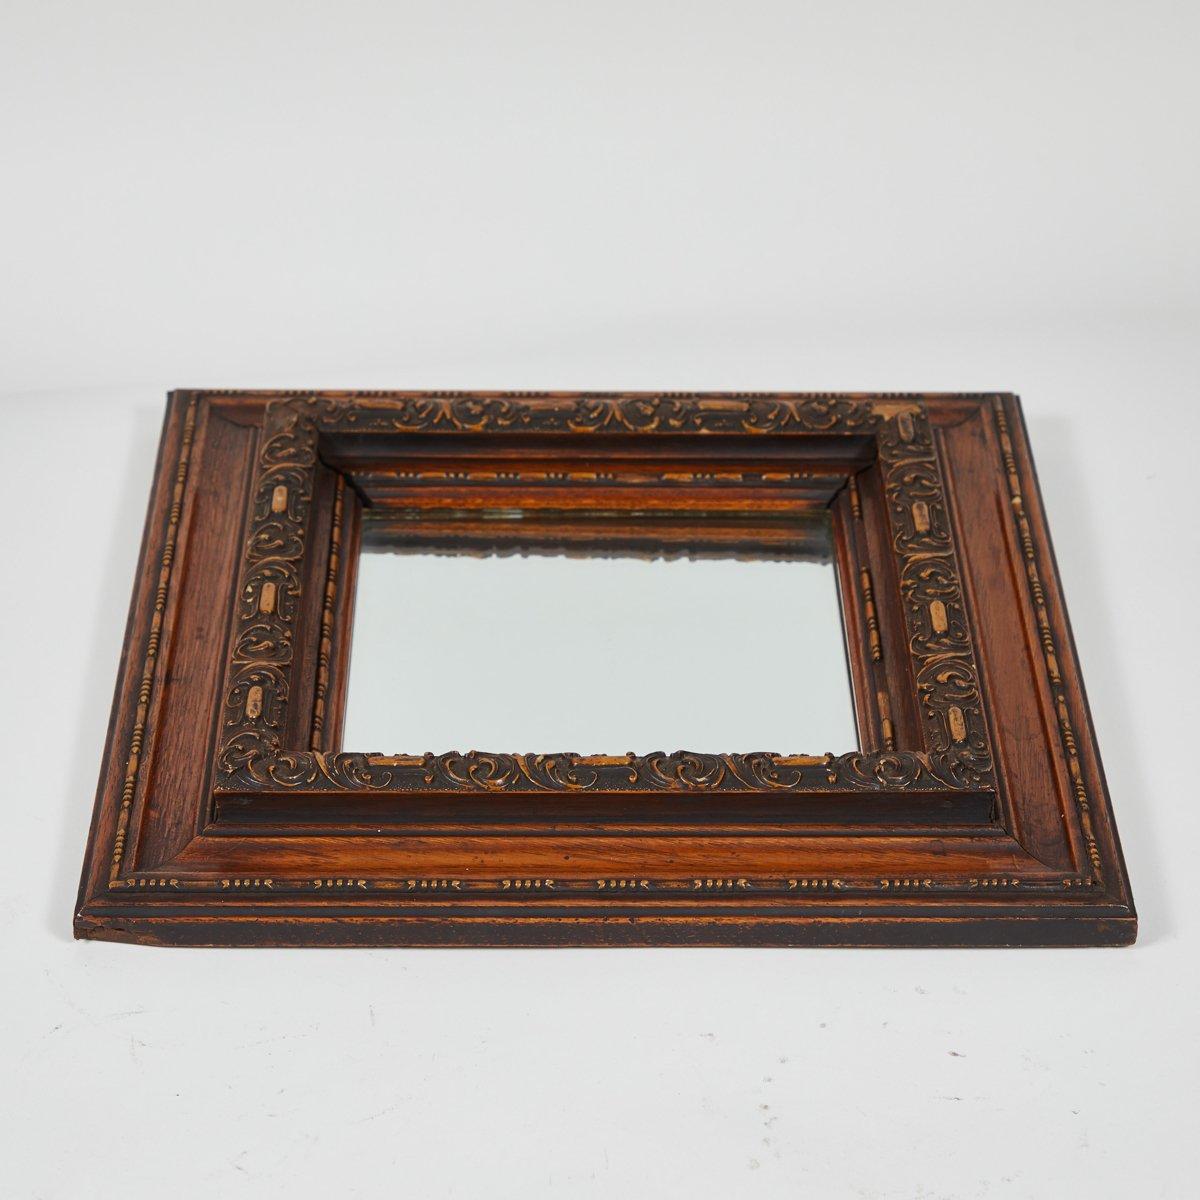 Late 19th-century English carved oak mirror with a thick square frame and beveled glass. Ornate yet understated, the piece has charming proportions and a rich natural patina. 

England, circa 1880

Dimensions: 14W x 2D x 14H